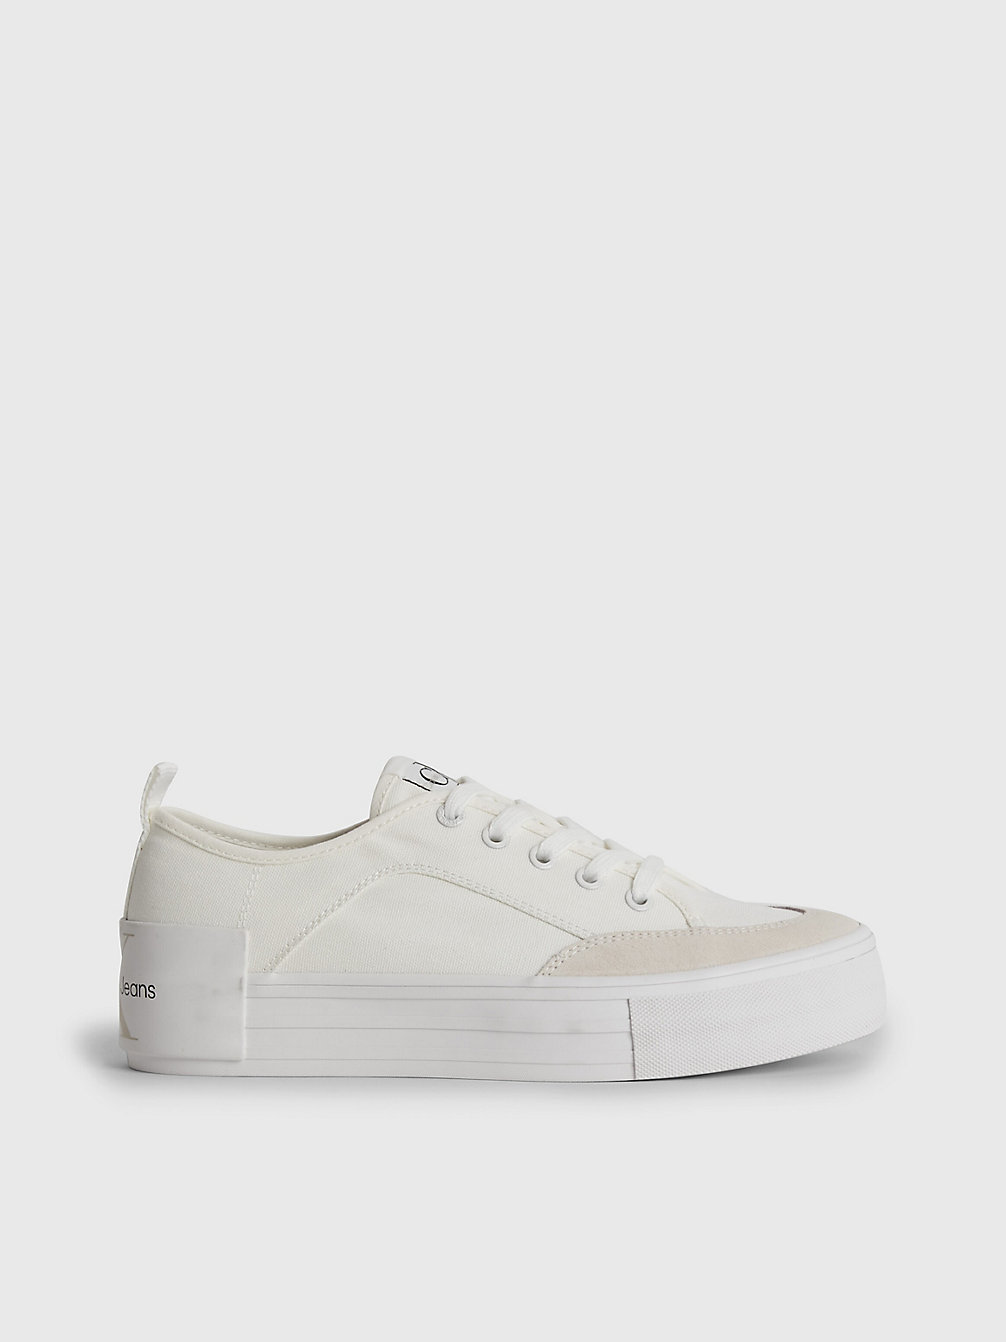 WHITE/ANCIENT WHITE Recycled Canvas Platform Trainers undefined women Calvin Klein